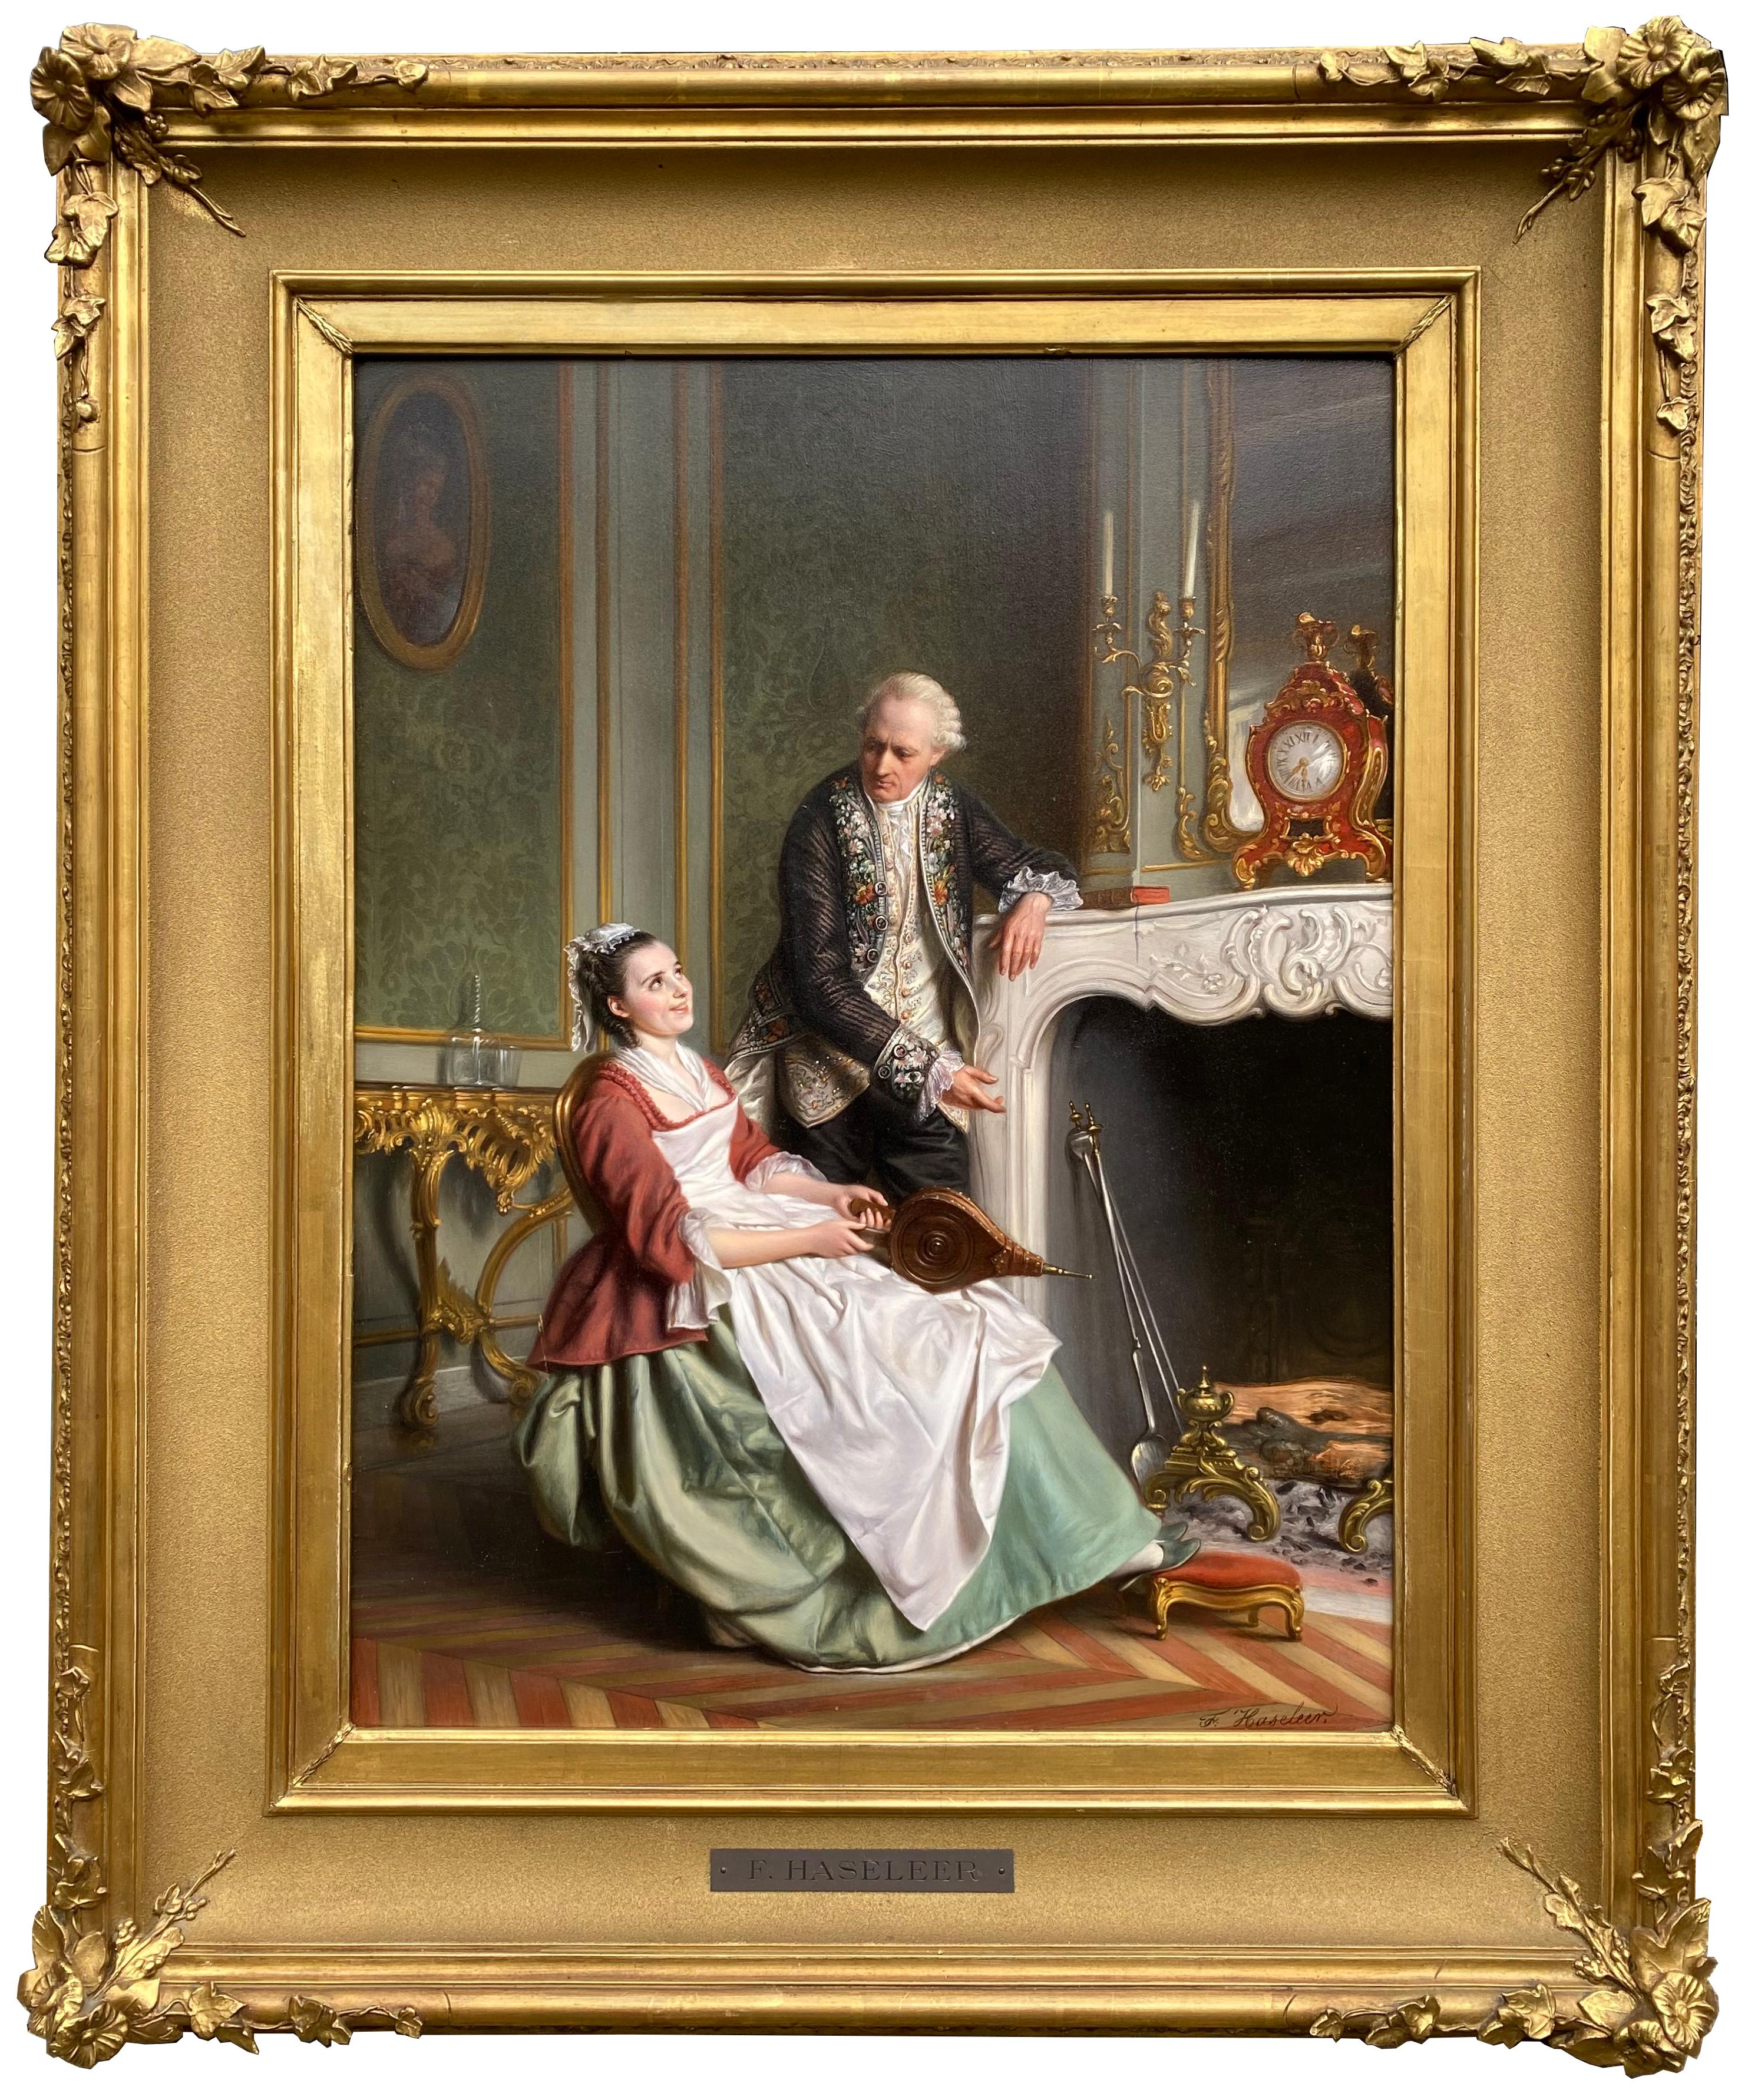 François Joseph Haseleer 
Brussels 1804 – 1890
Belgian Painter

'The Fireplace'
Signature: Signed bottom right
Medium: Oil on panel
Dimensions: Image size 55 x 42,50 cm, frame size 78 x 65 cm

Biography: Haseleer François Joseph Corneille was born